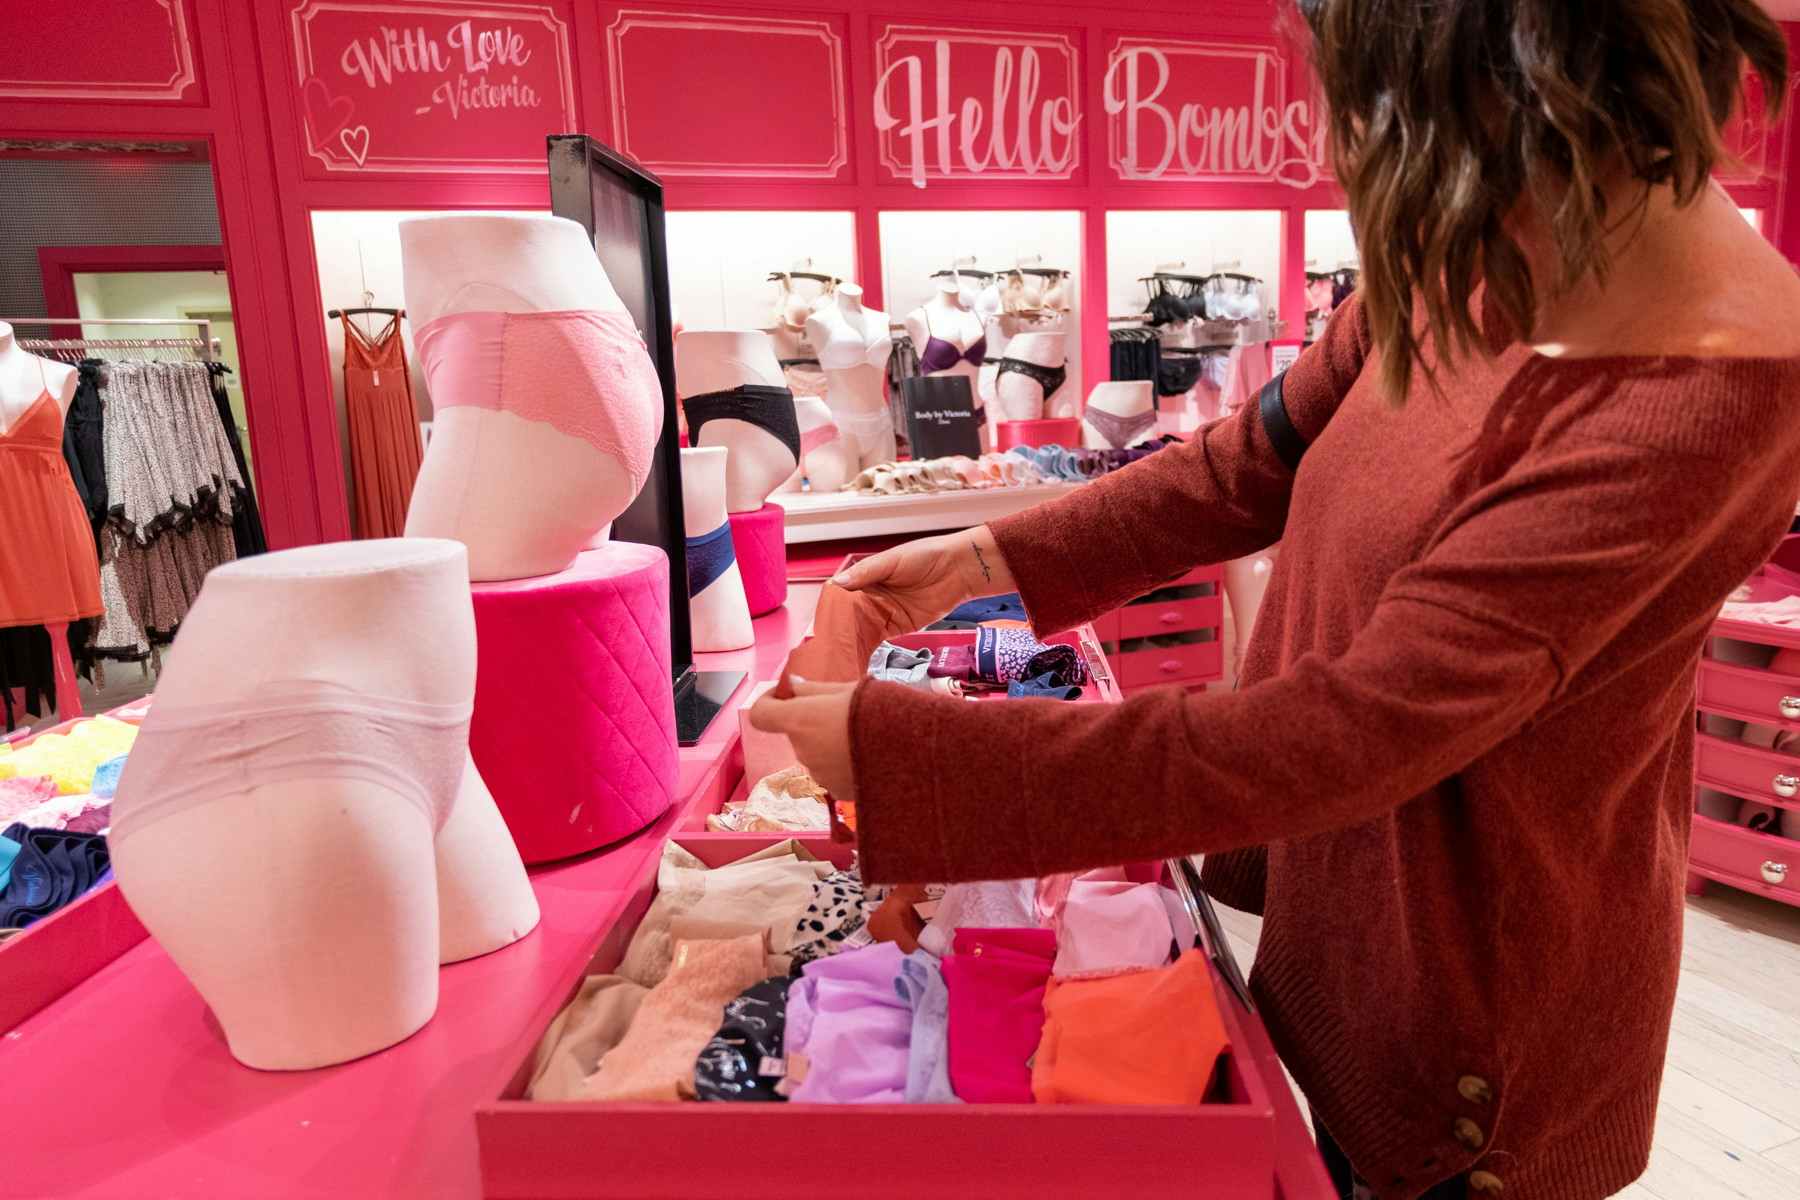 A woman looking through some panties on display at Victoria's Secret.